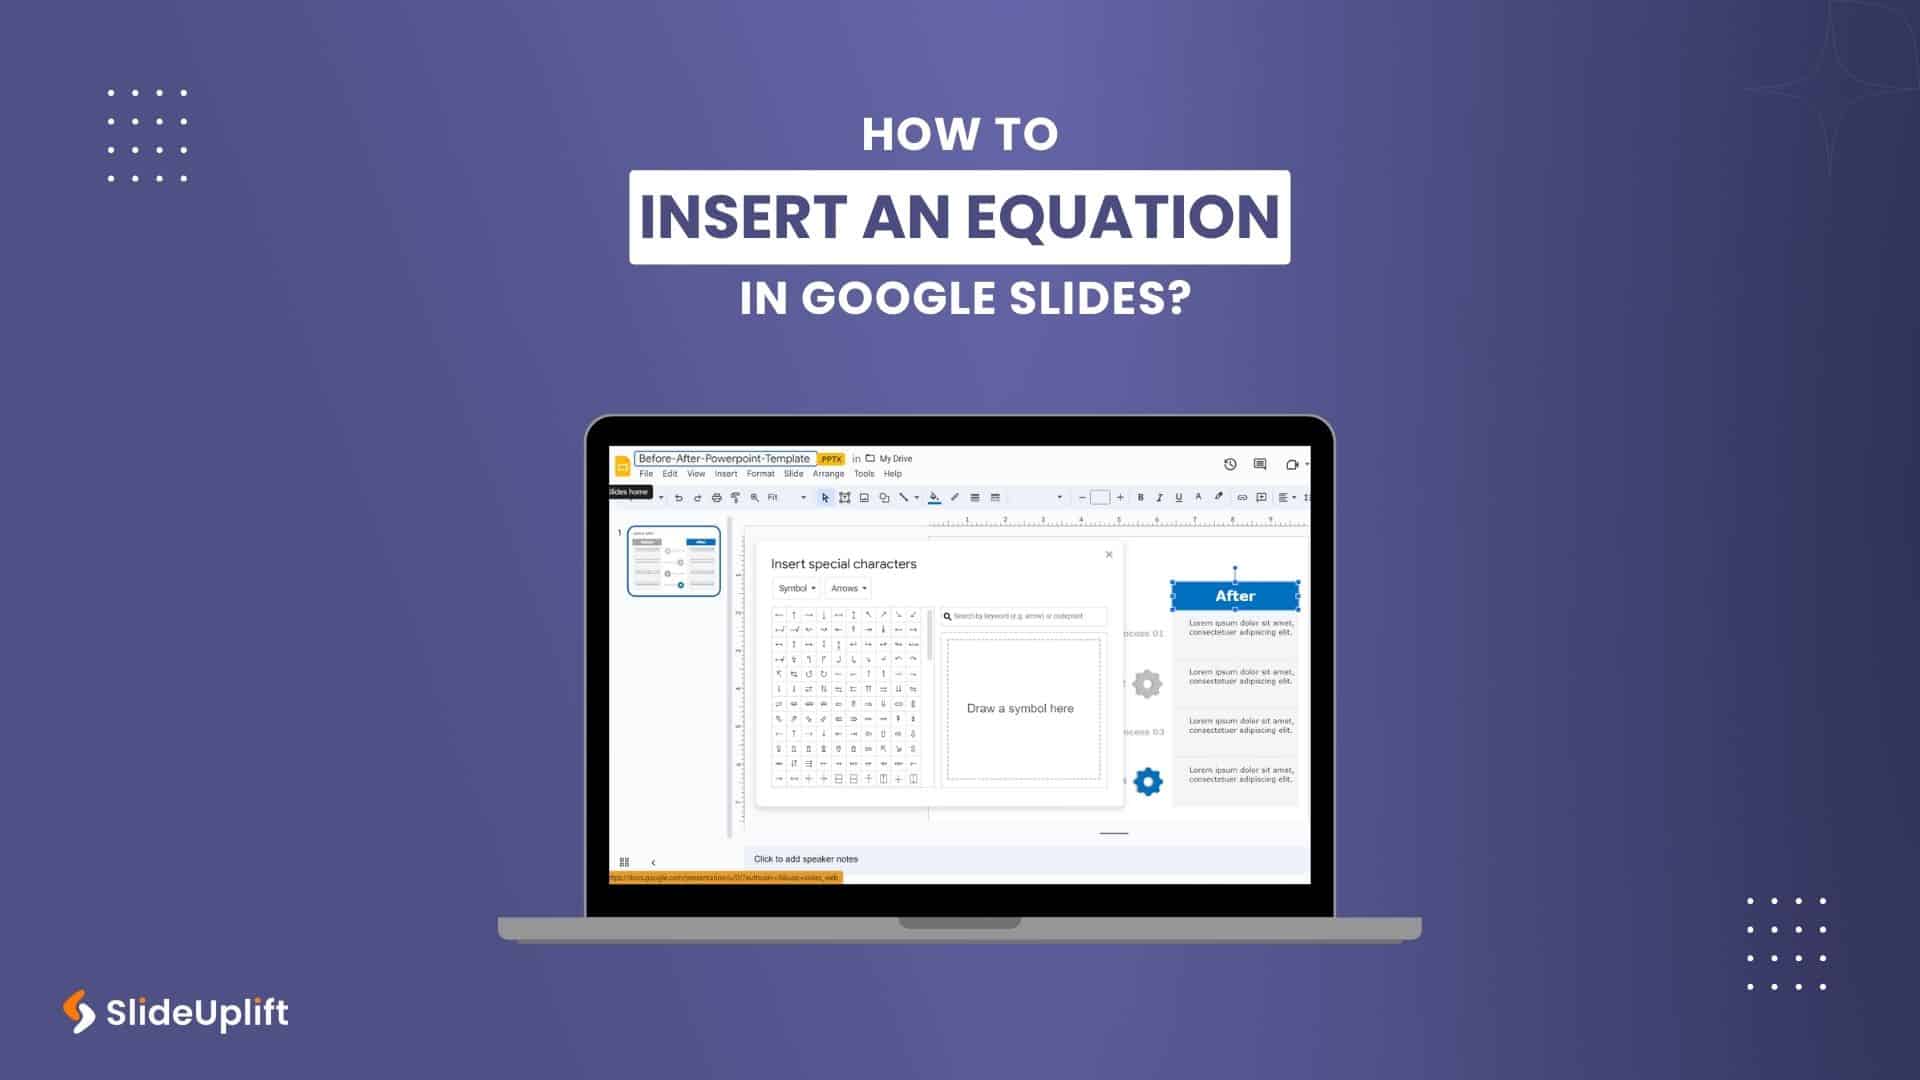 How To Insert An Equation In Google Slides?